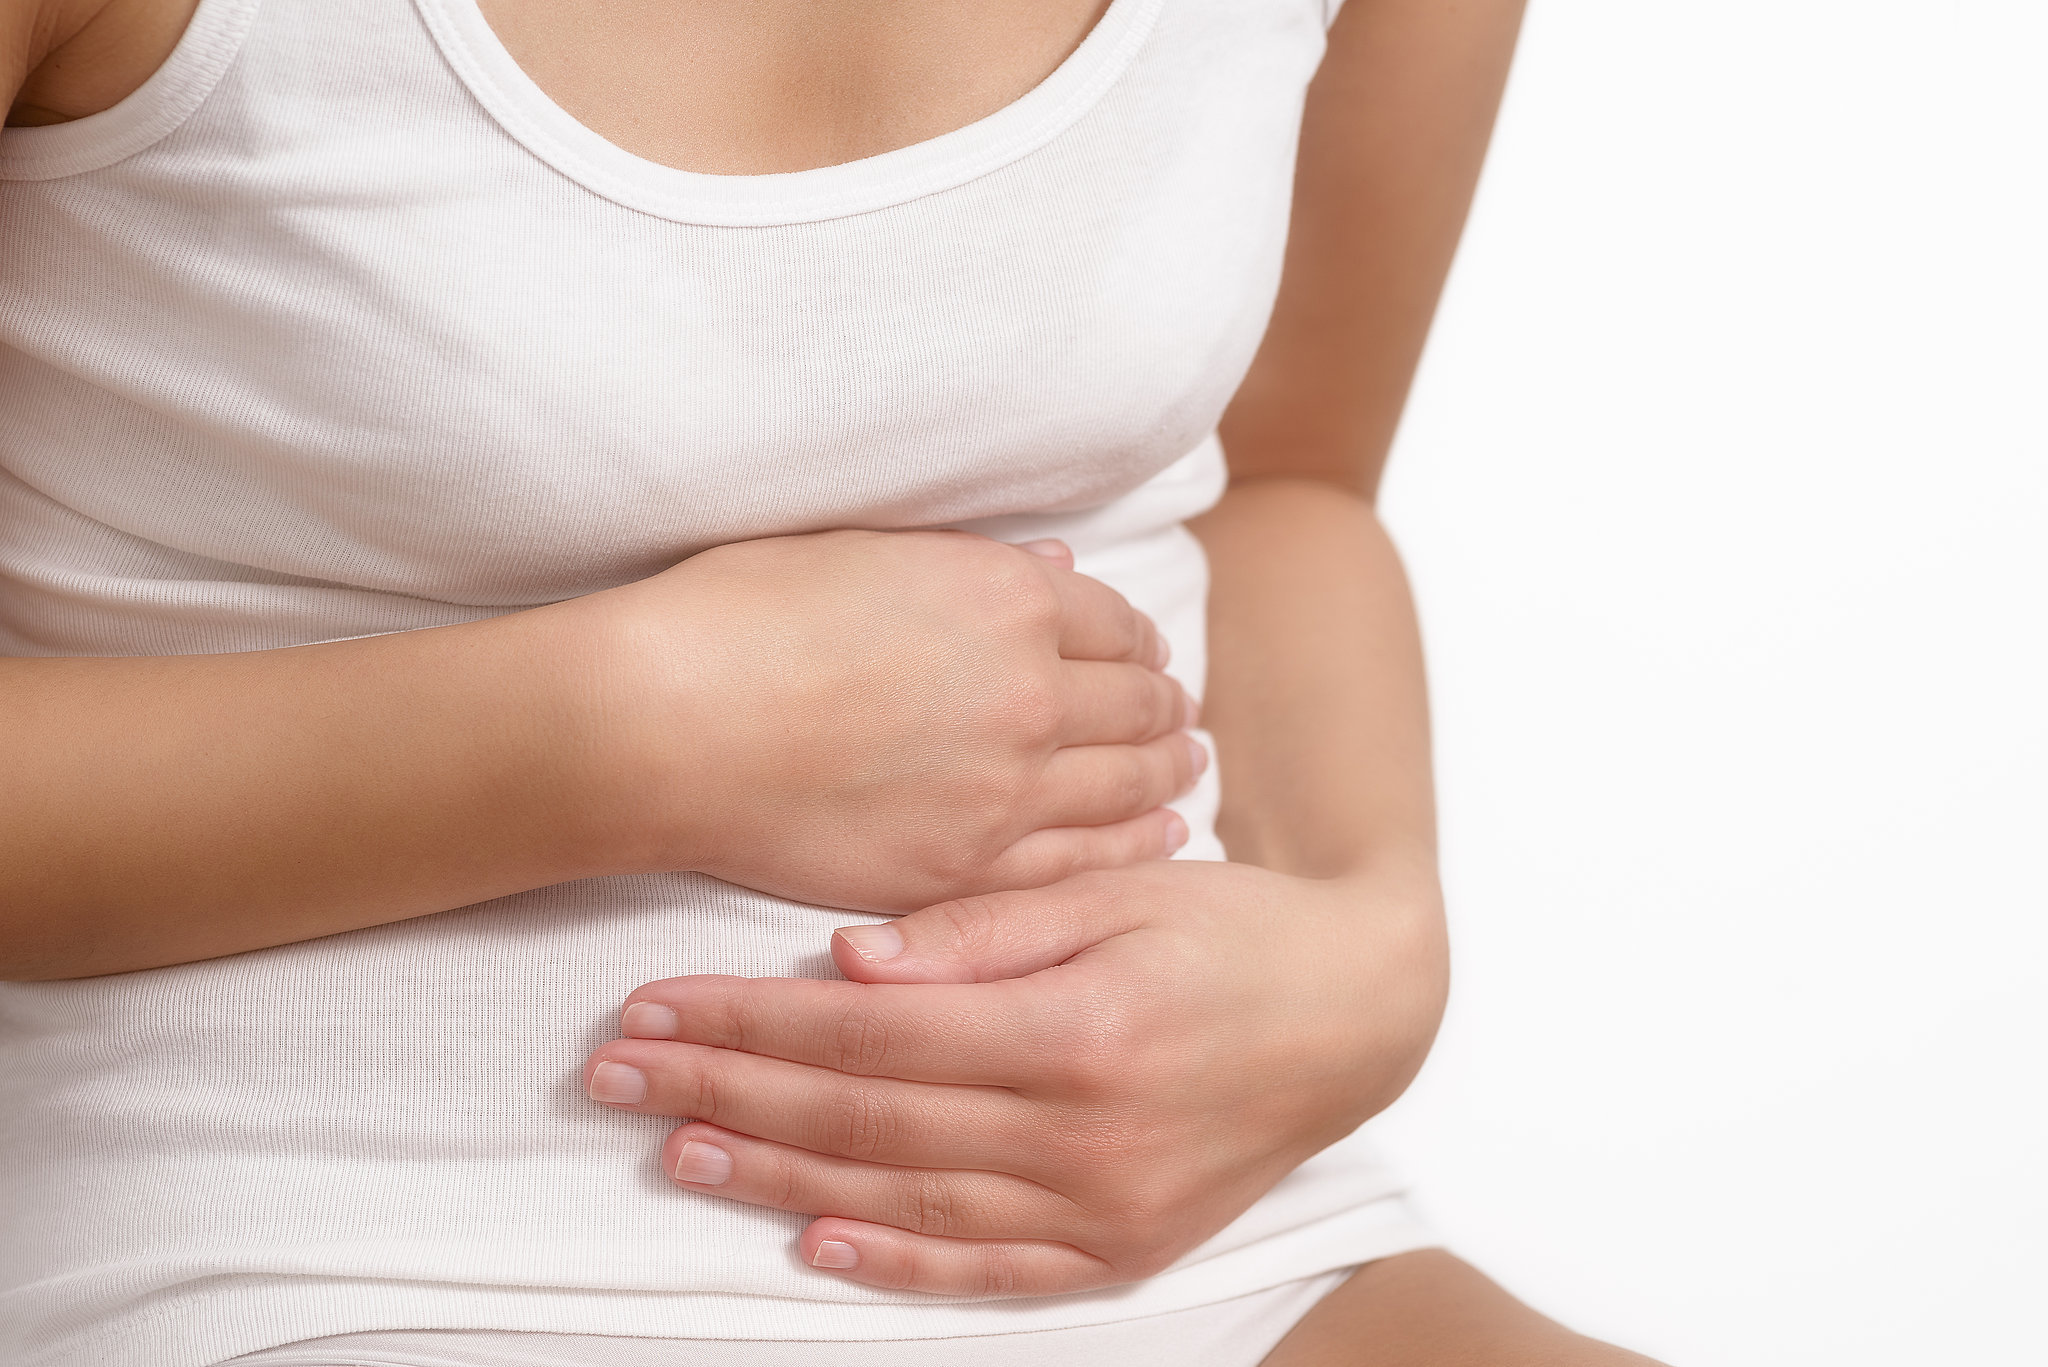 5 Infallible Homeopathic Remedies For Constipation